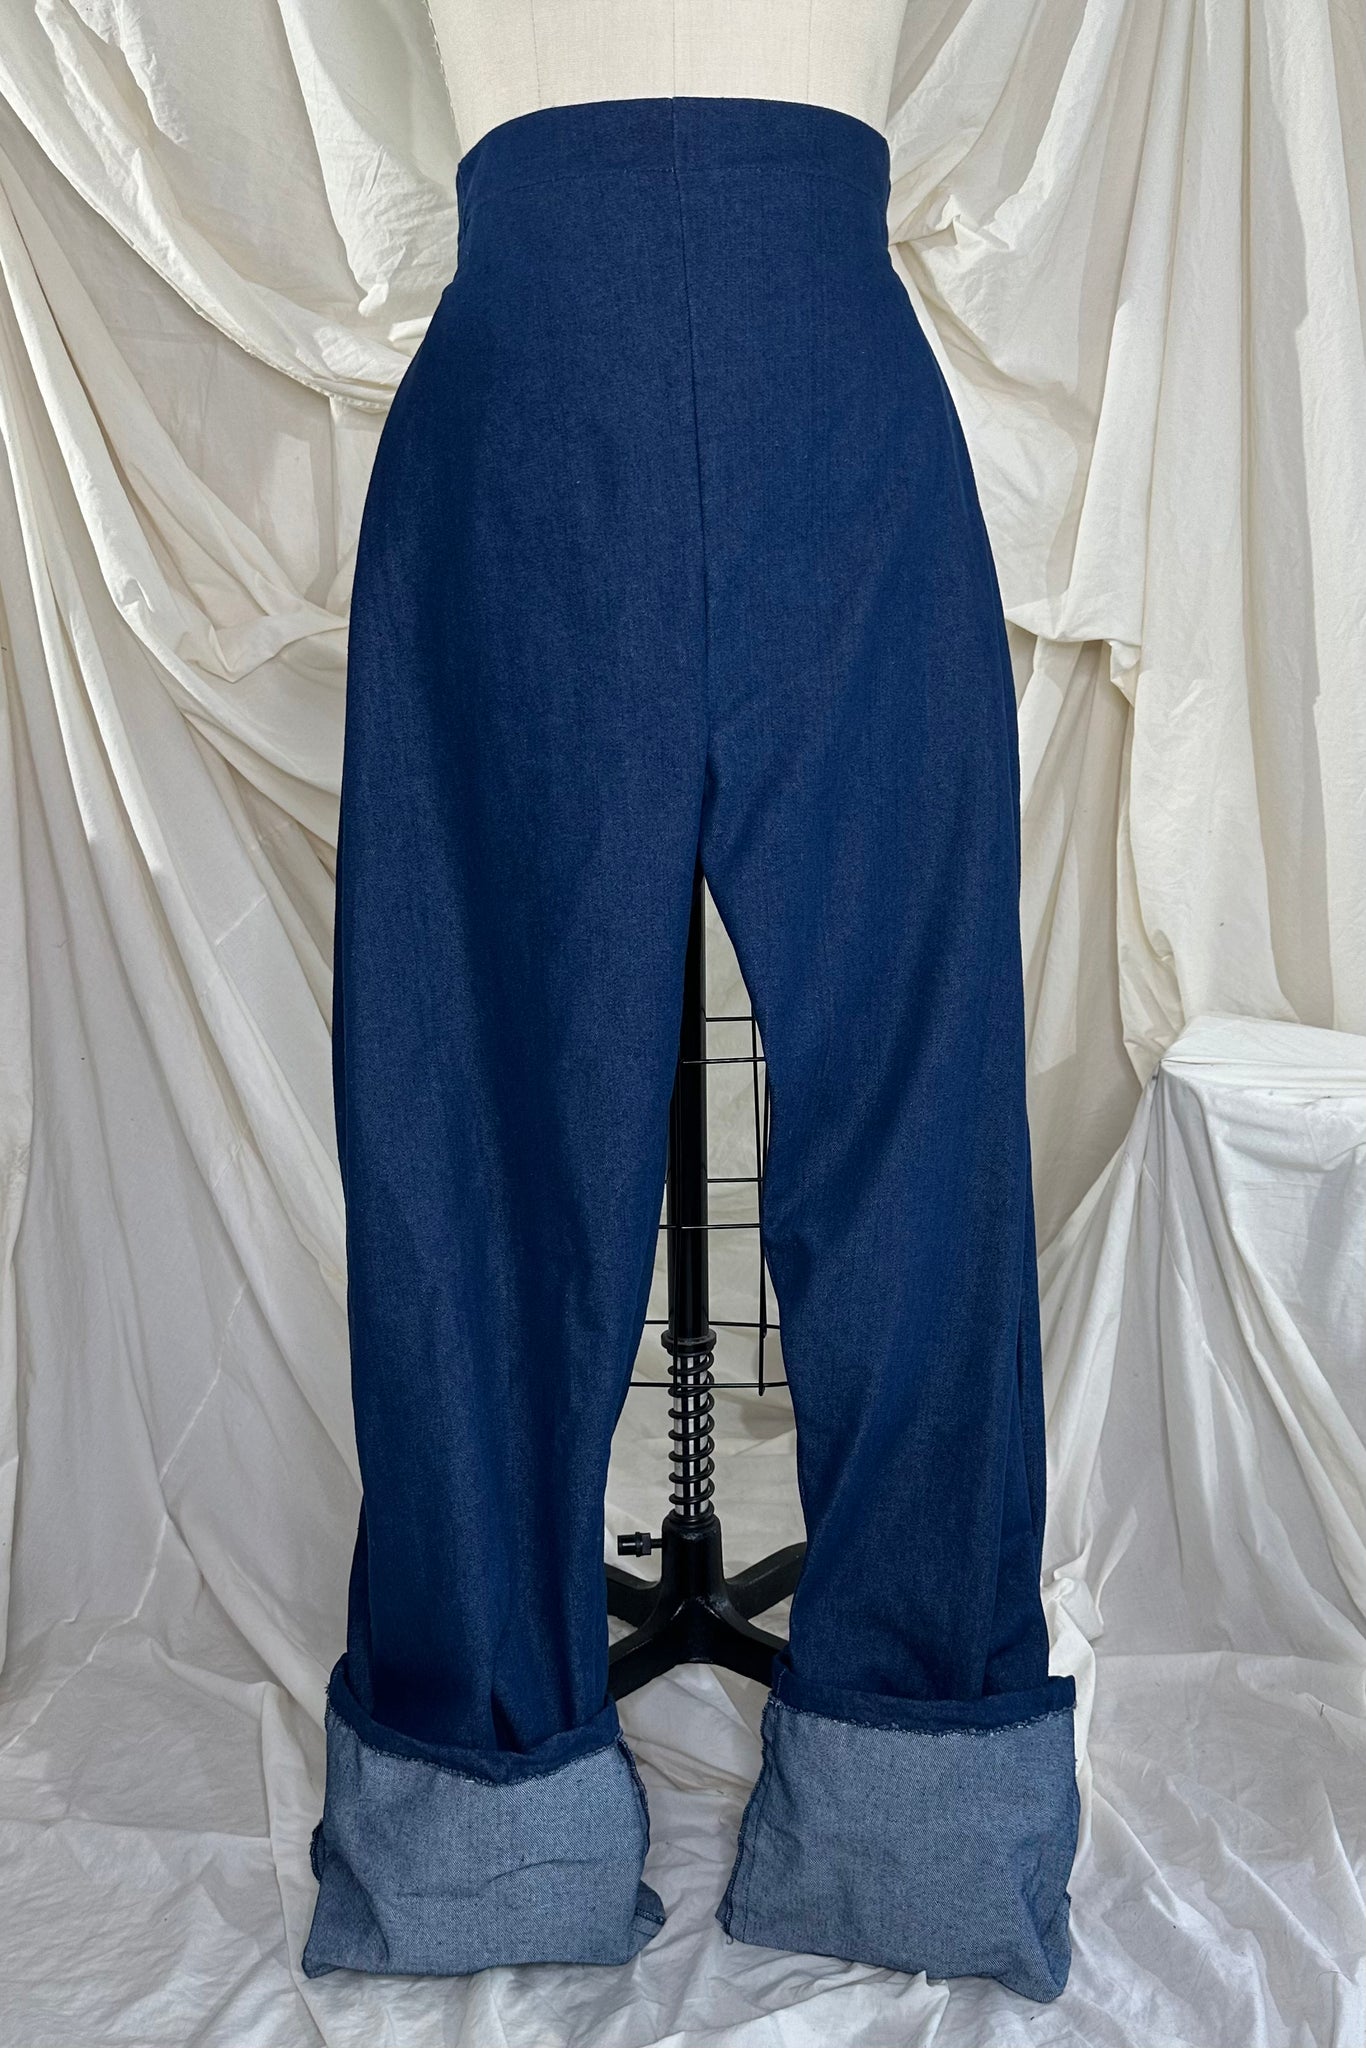 The Baggy Cuffed Trouser